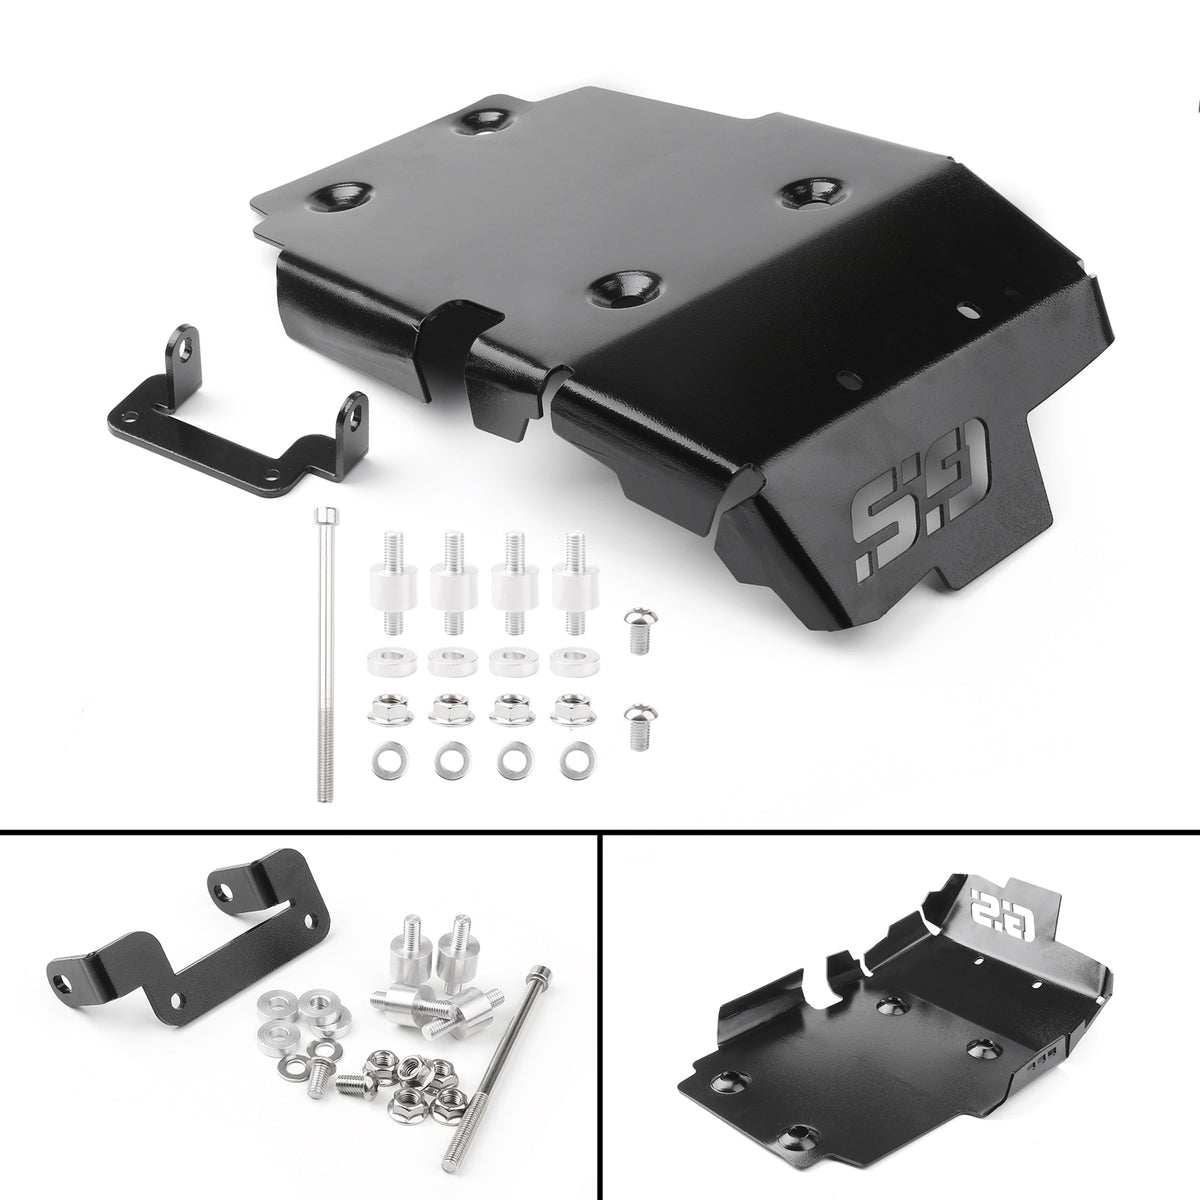 Engine Protector Bash Guard Skid Plate Set Fit For BMW F650 F700 F800 GS 2008-2017